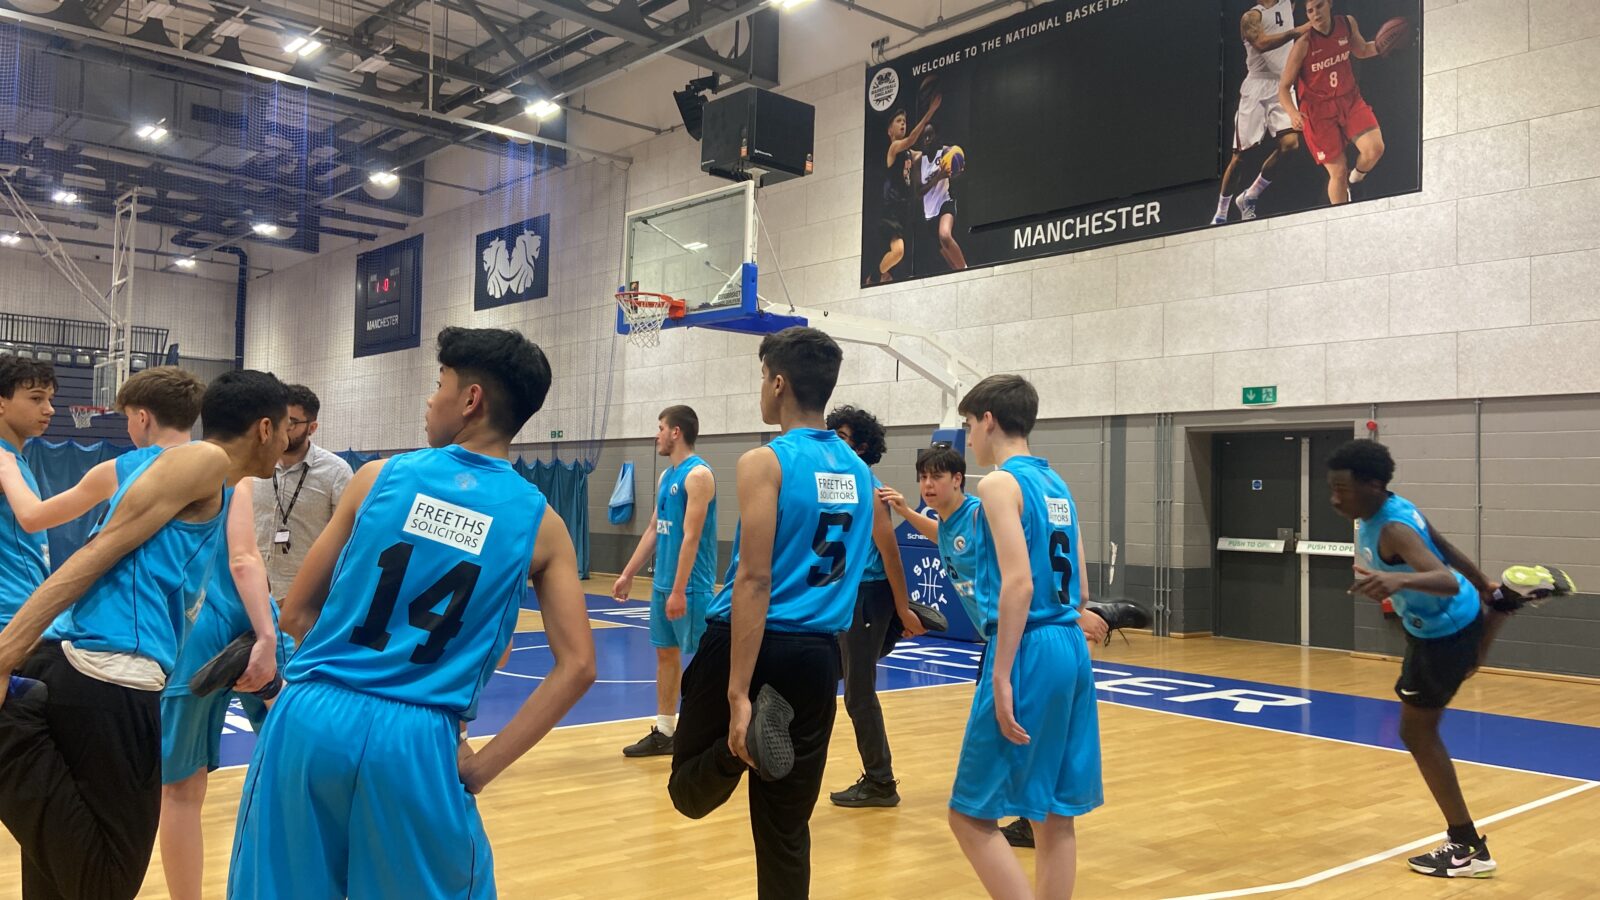 Year 9 boys warm up at the National Basketball Arena in Manchester ahead of their game against Sale Grammar in the National Schools Cup.